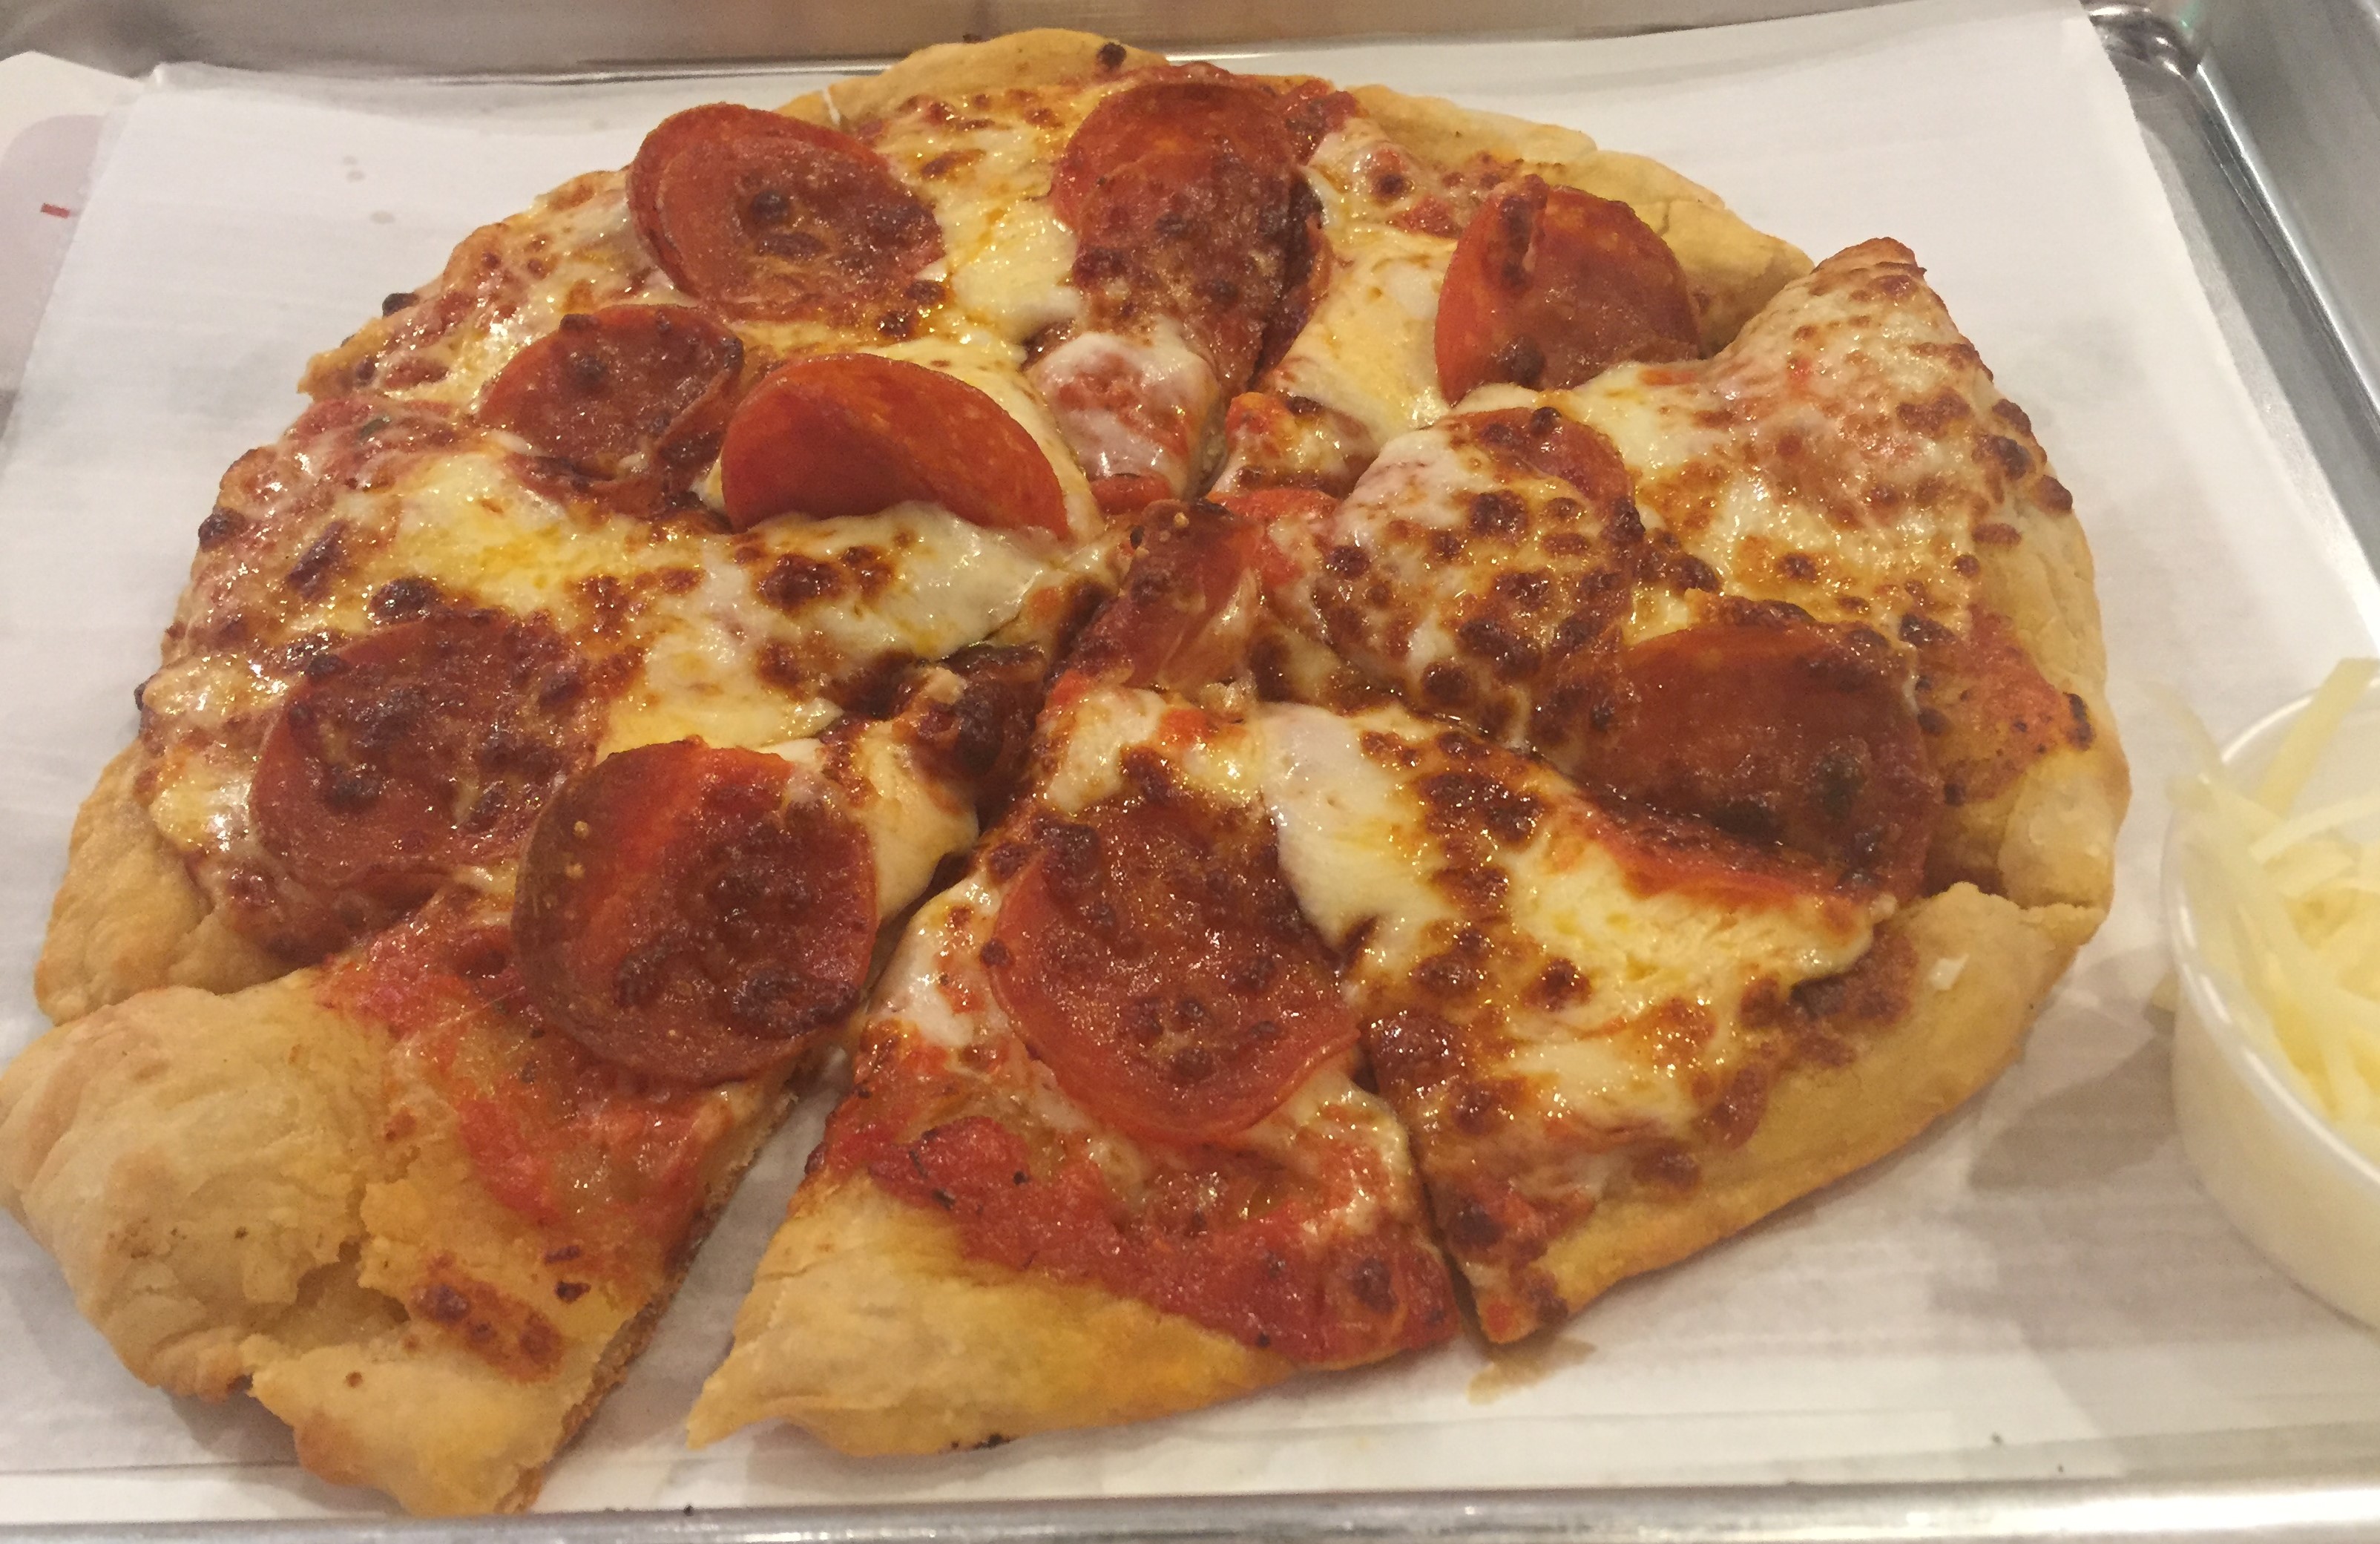 Pepperoni pizza- We all took a slice of this and brought the rest home.